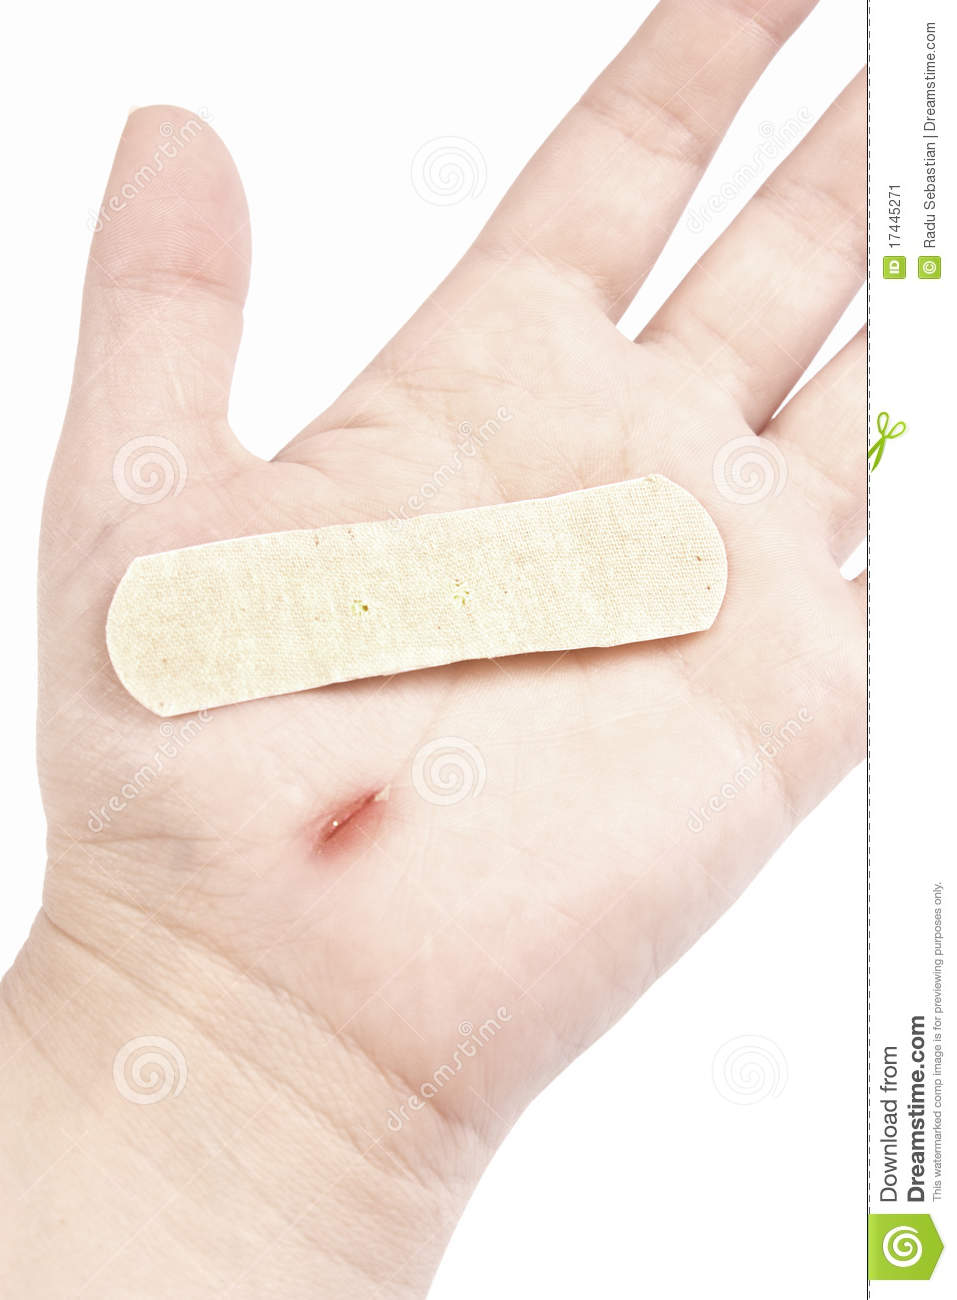 Bandaid Patch On Hand Isolated Over White Background With Clipping